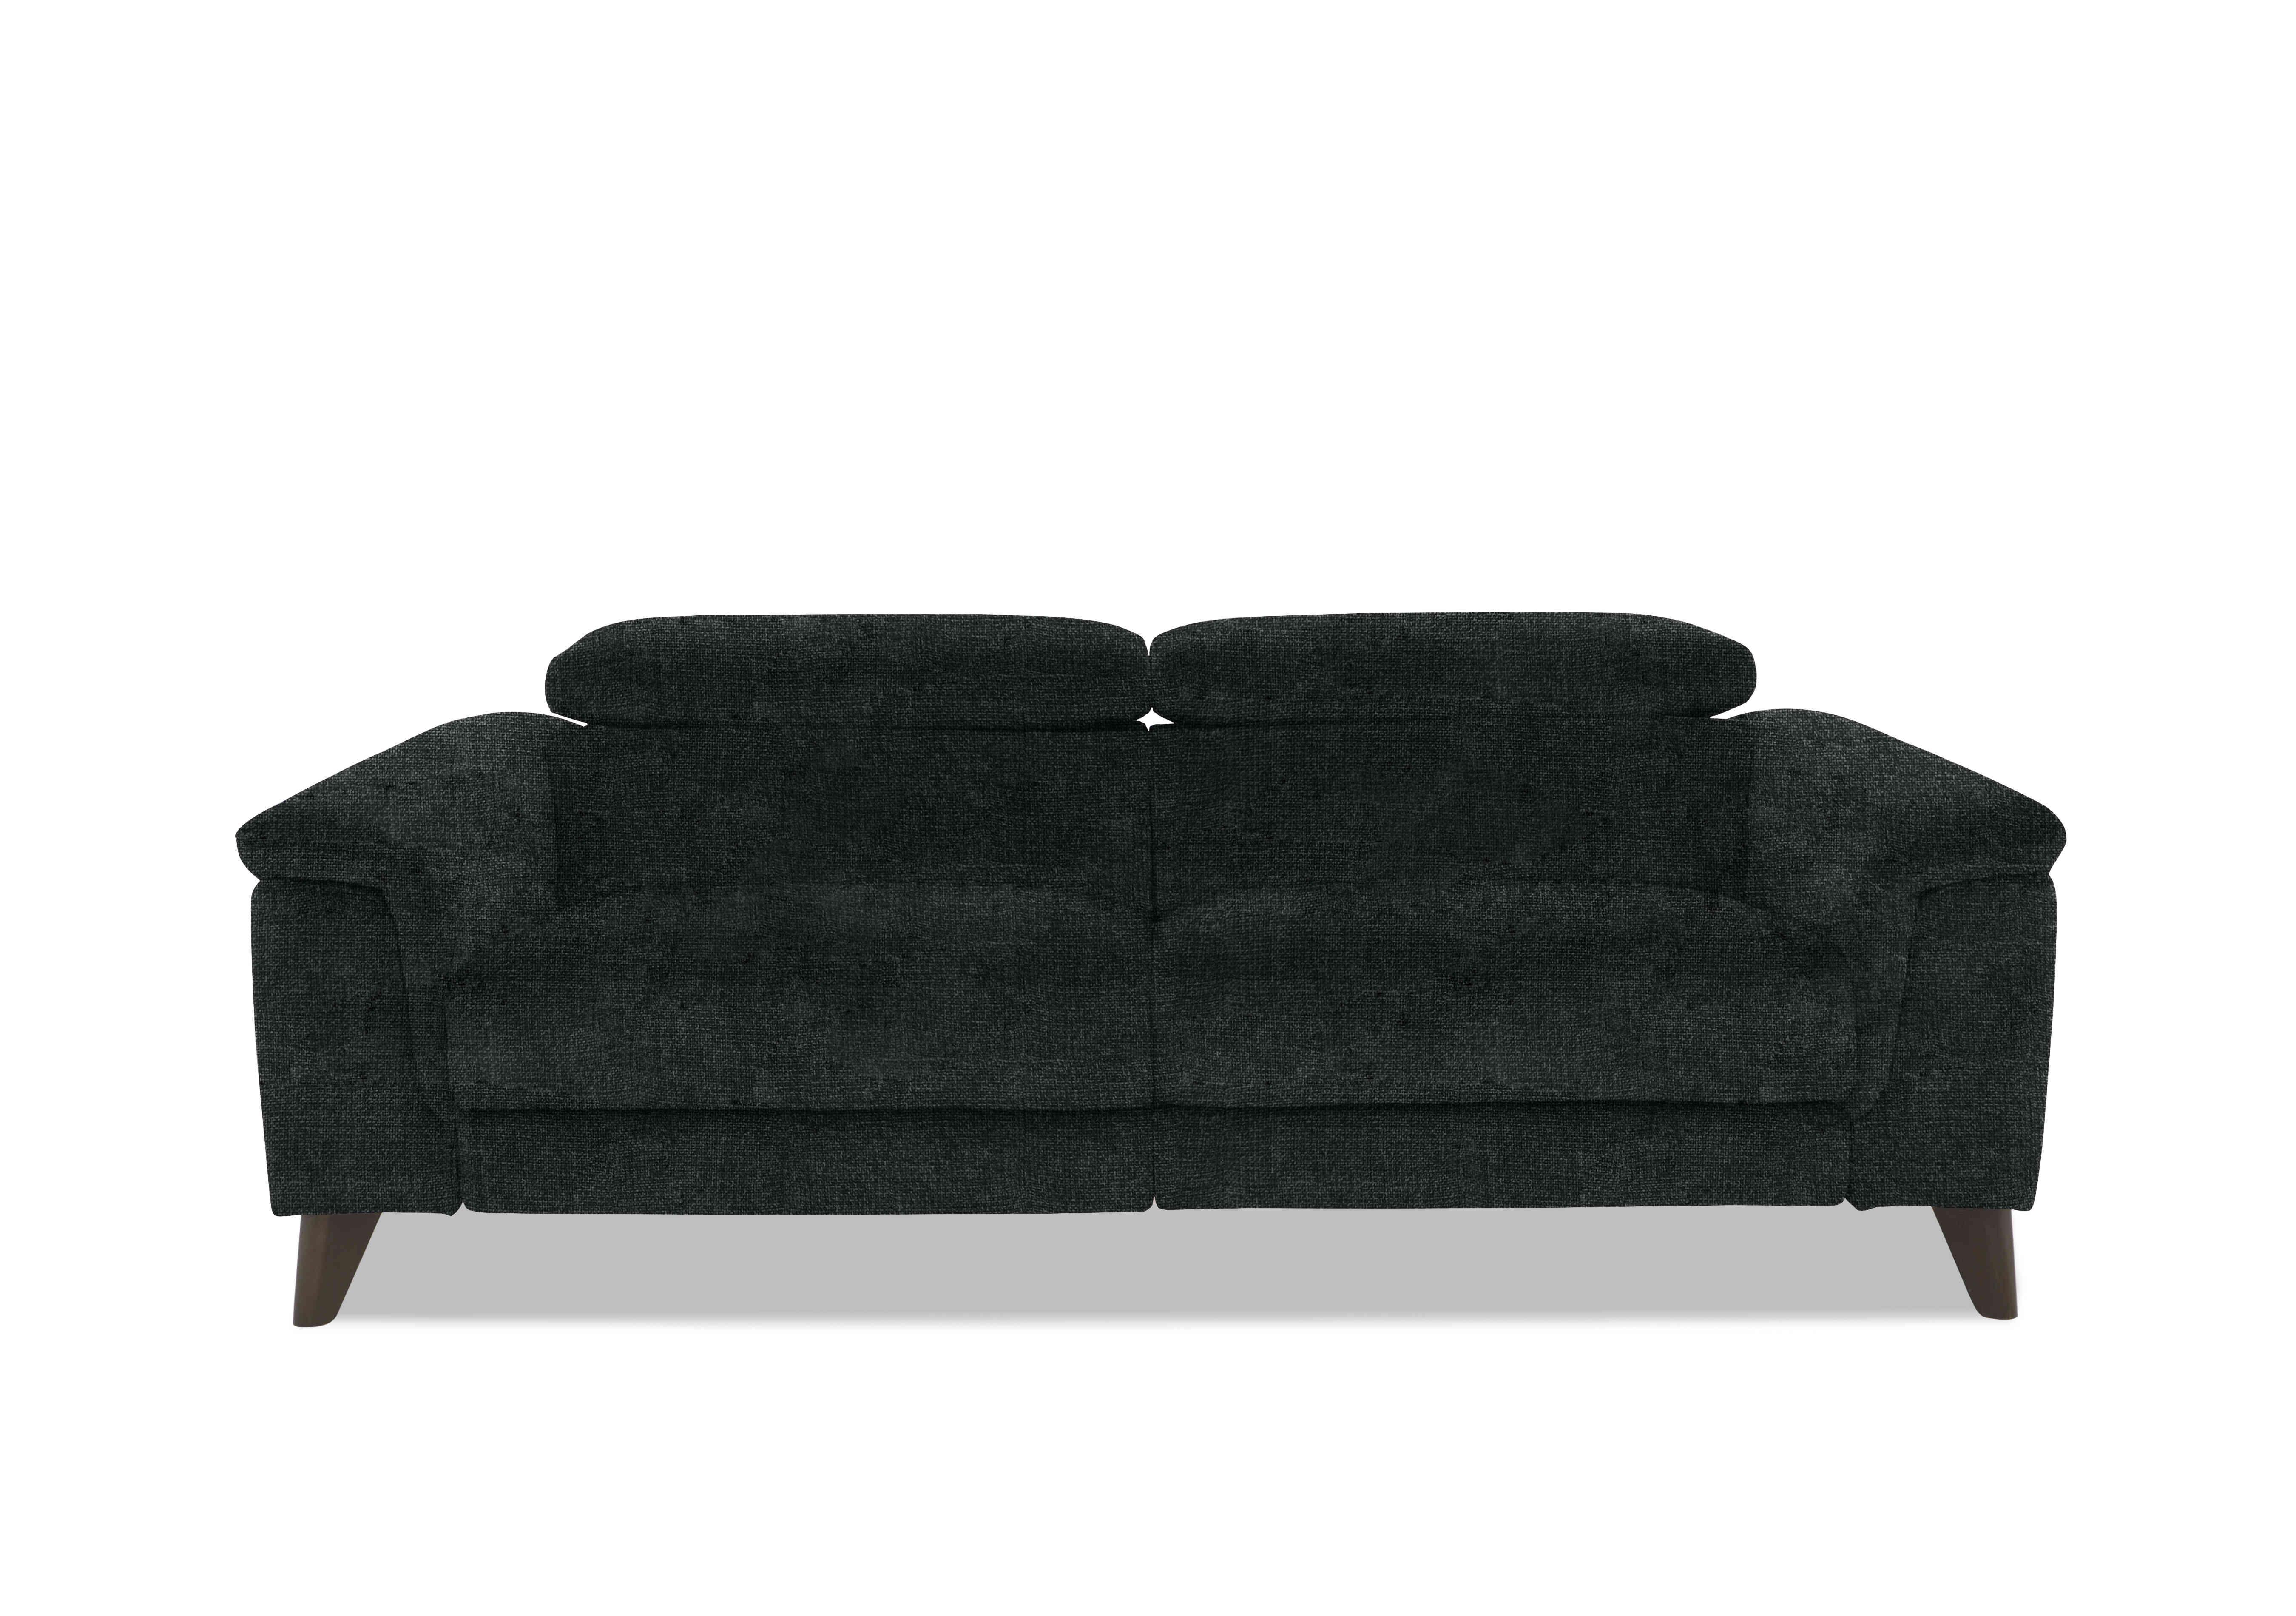 Wade 3 Seater Fabric Sofa in Fab-Cac-R463 Black Mica on Furniture Village